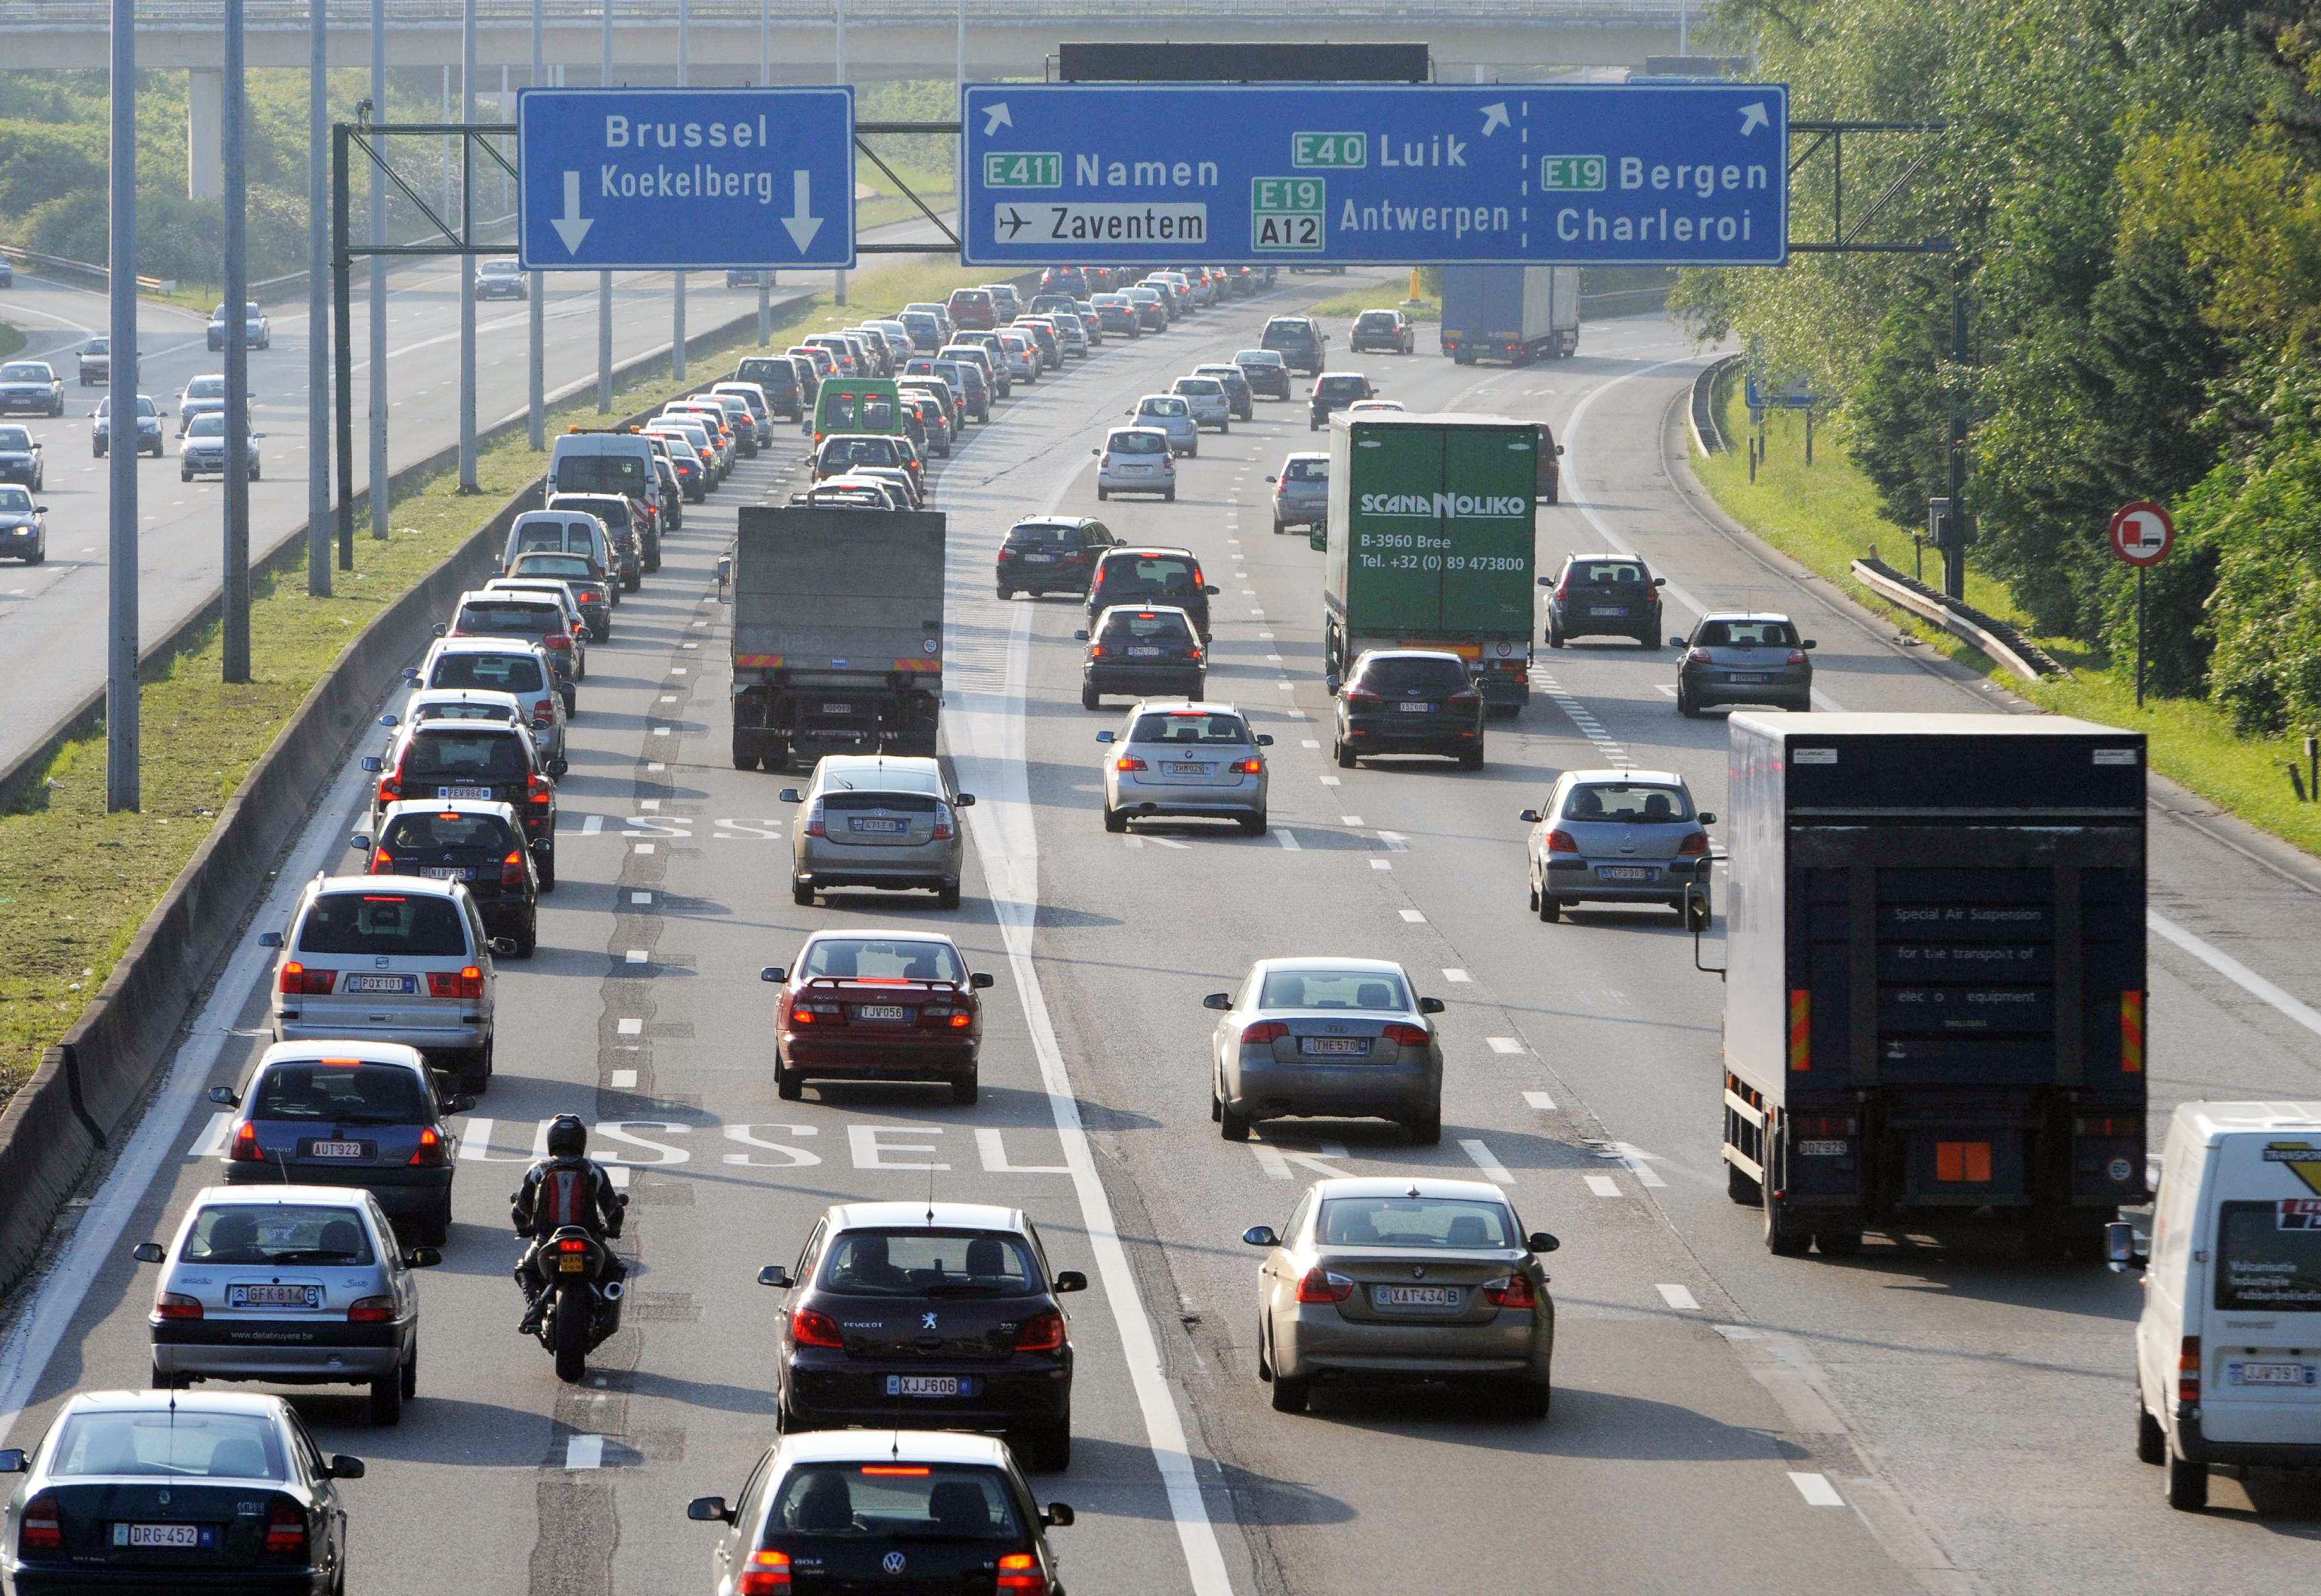 Touring: ‘67% of Belgian drivers oppose a city toll’